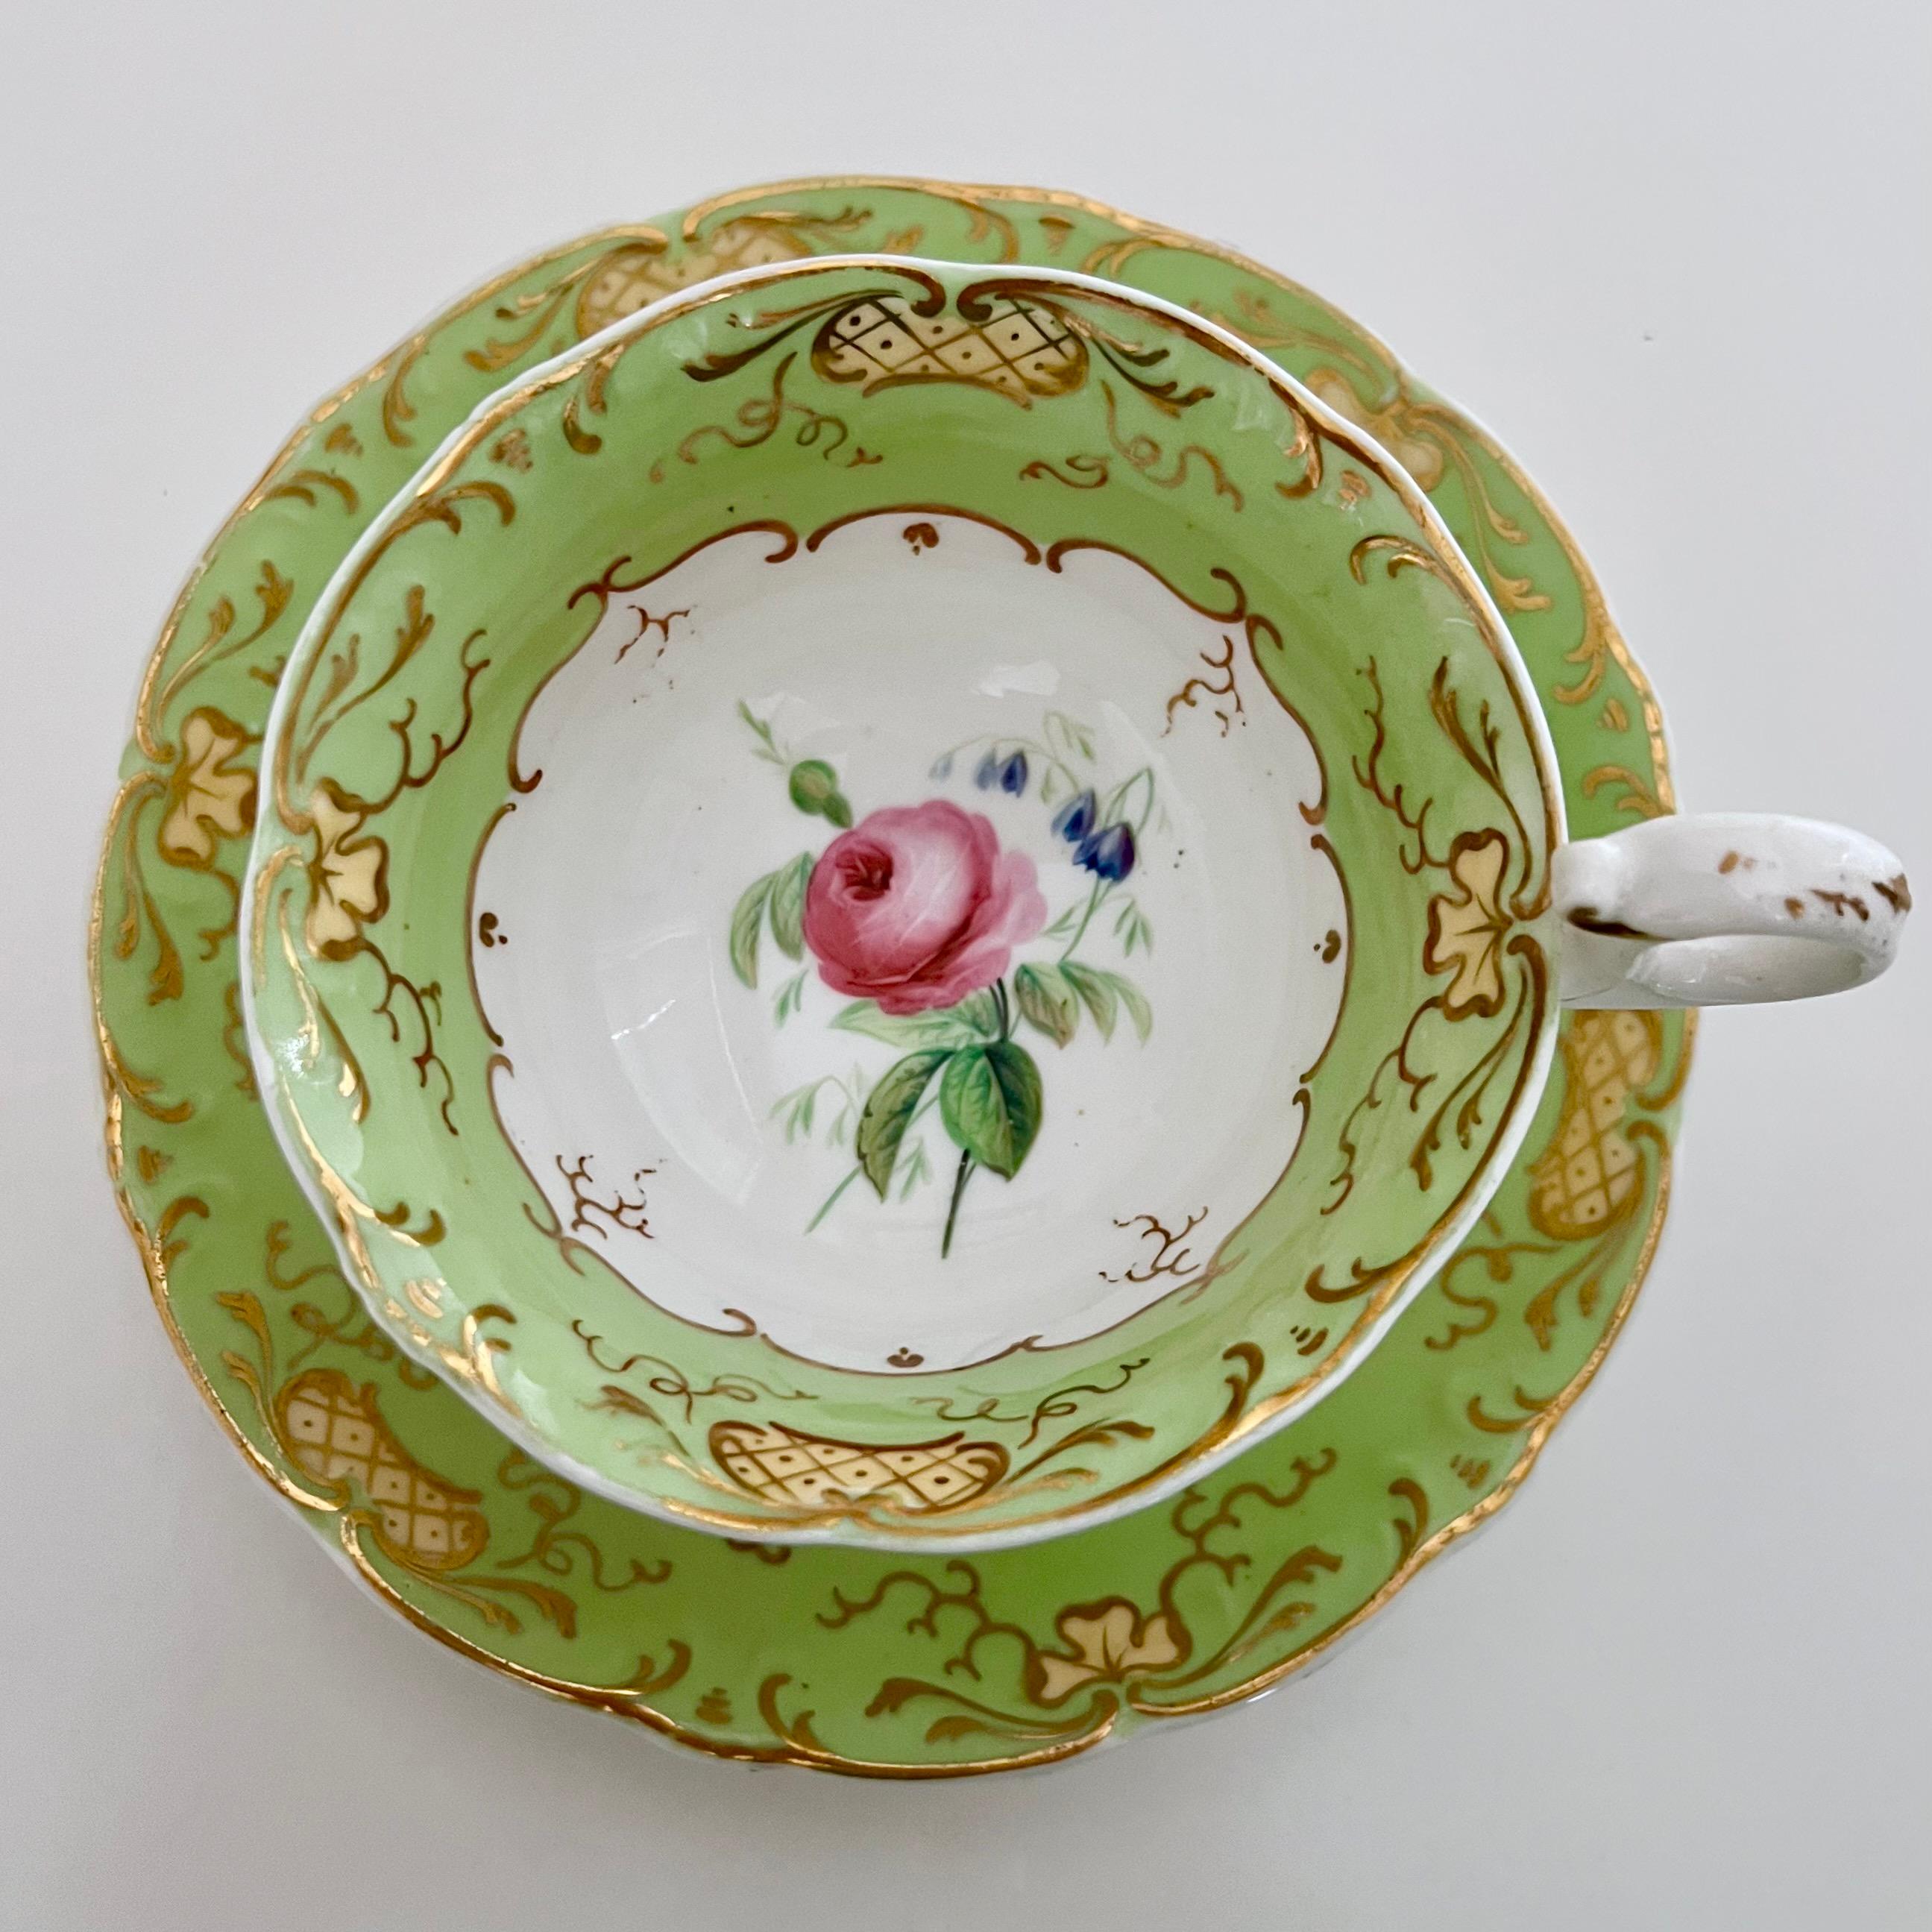 Hand-Painted H & R Daniel Porcelain Teacup, Apple Green with Pink Roses, Rococo Revival C1840